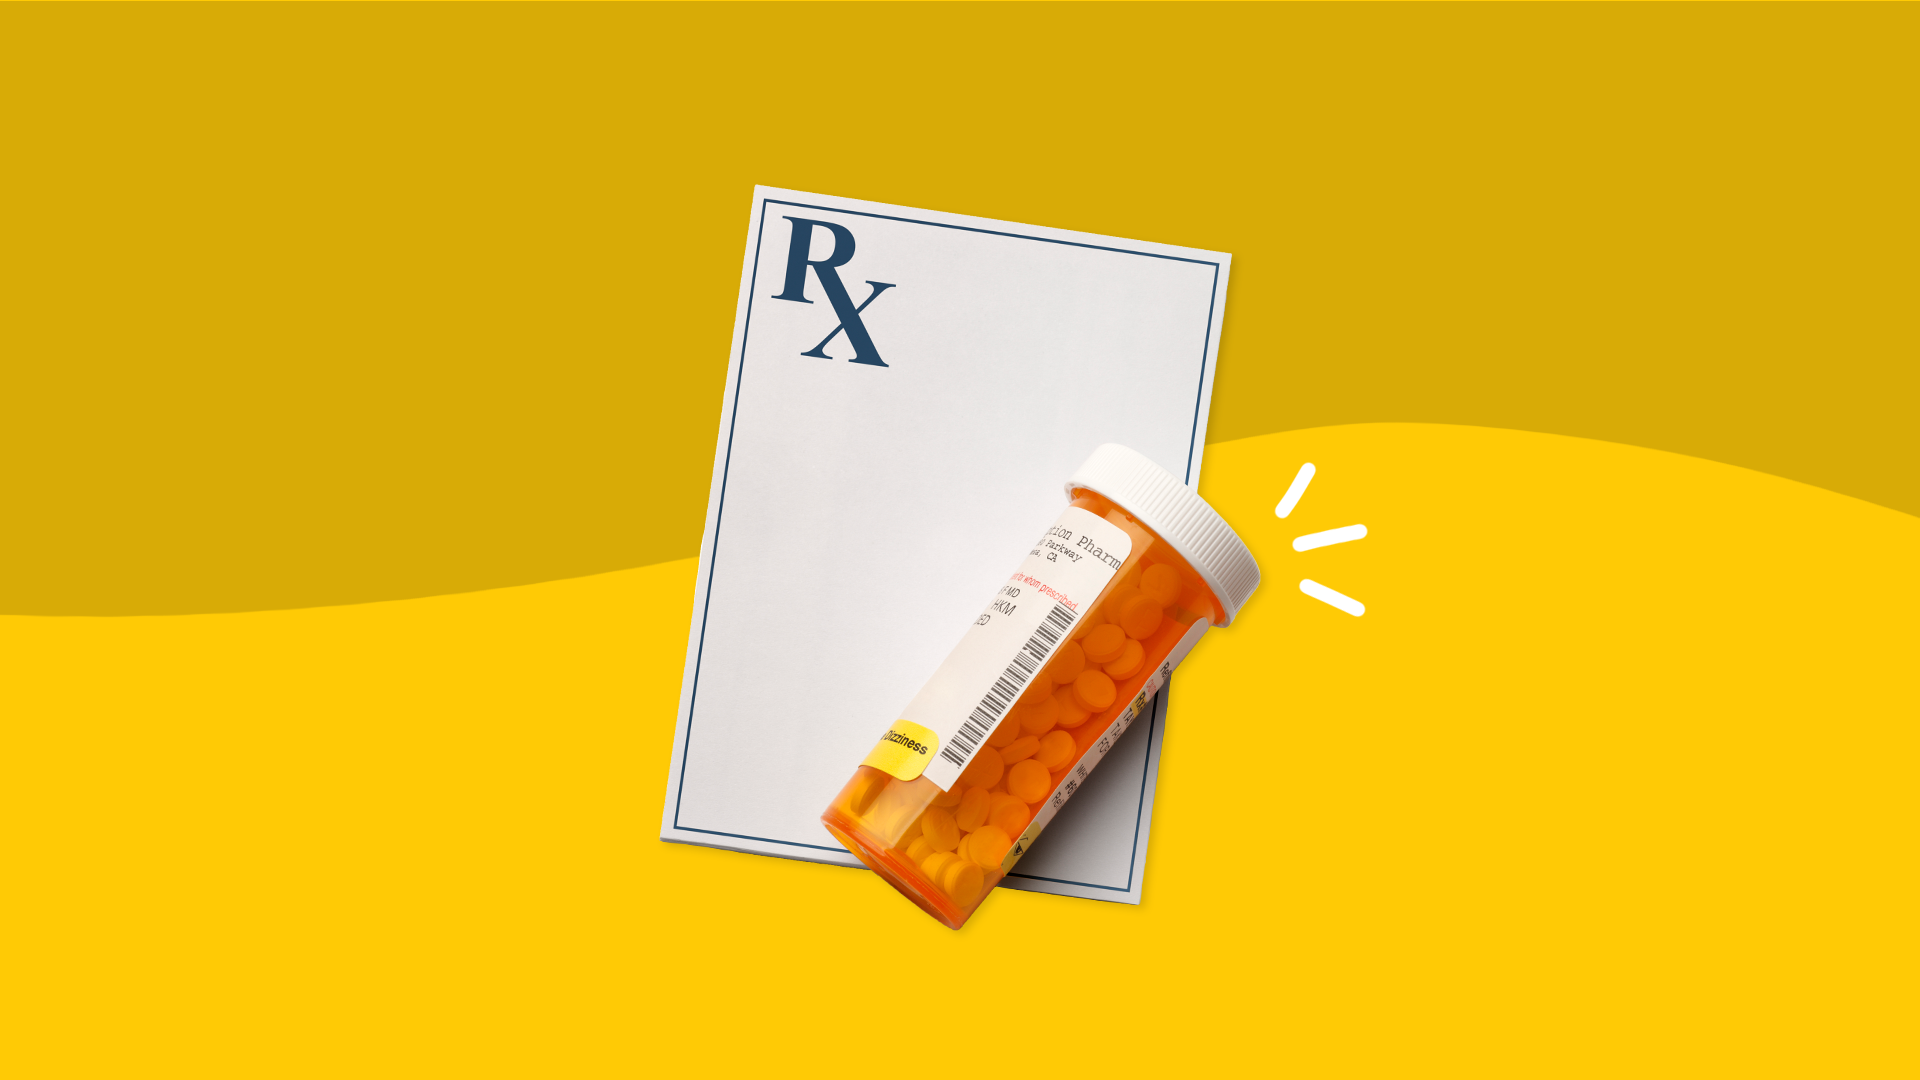 Prescription pad and bottle: Aimovig side effects